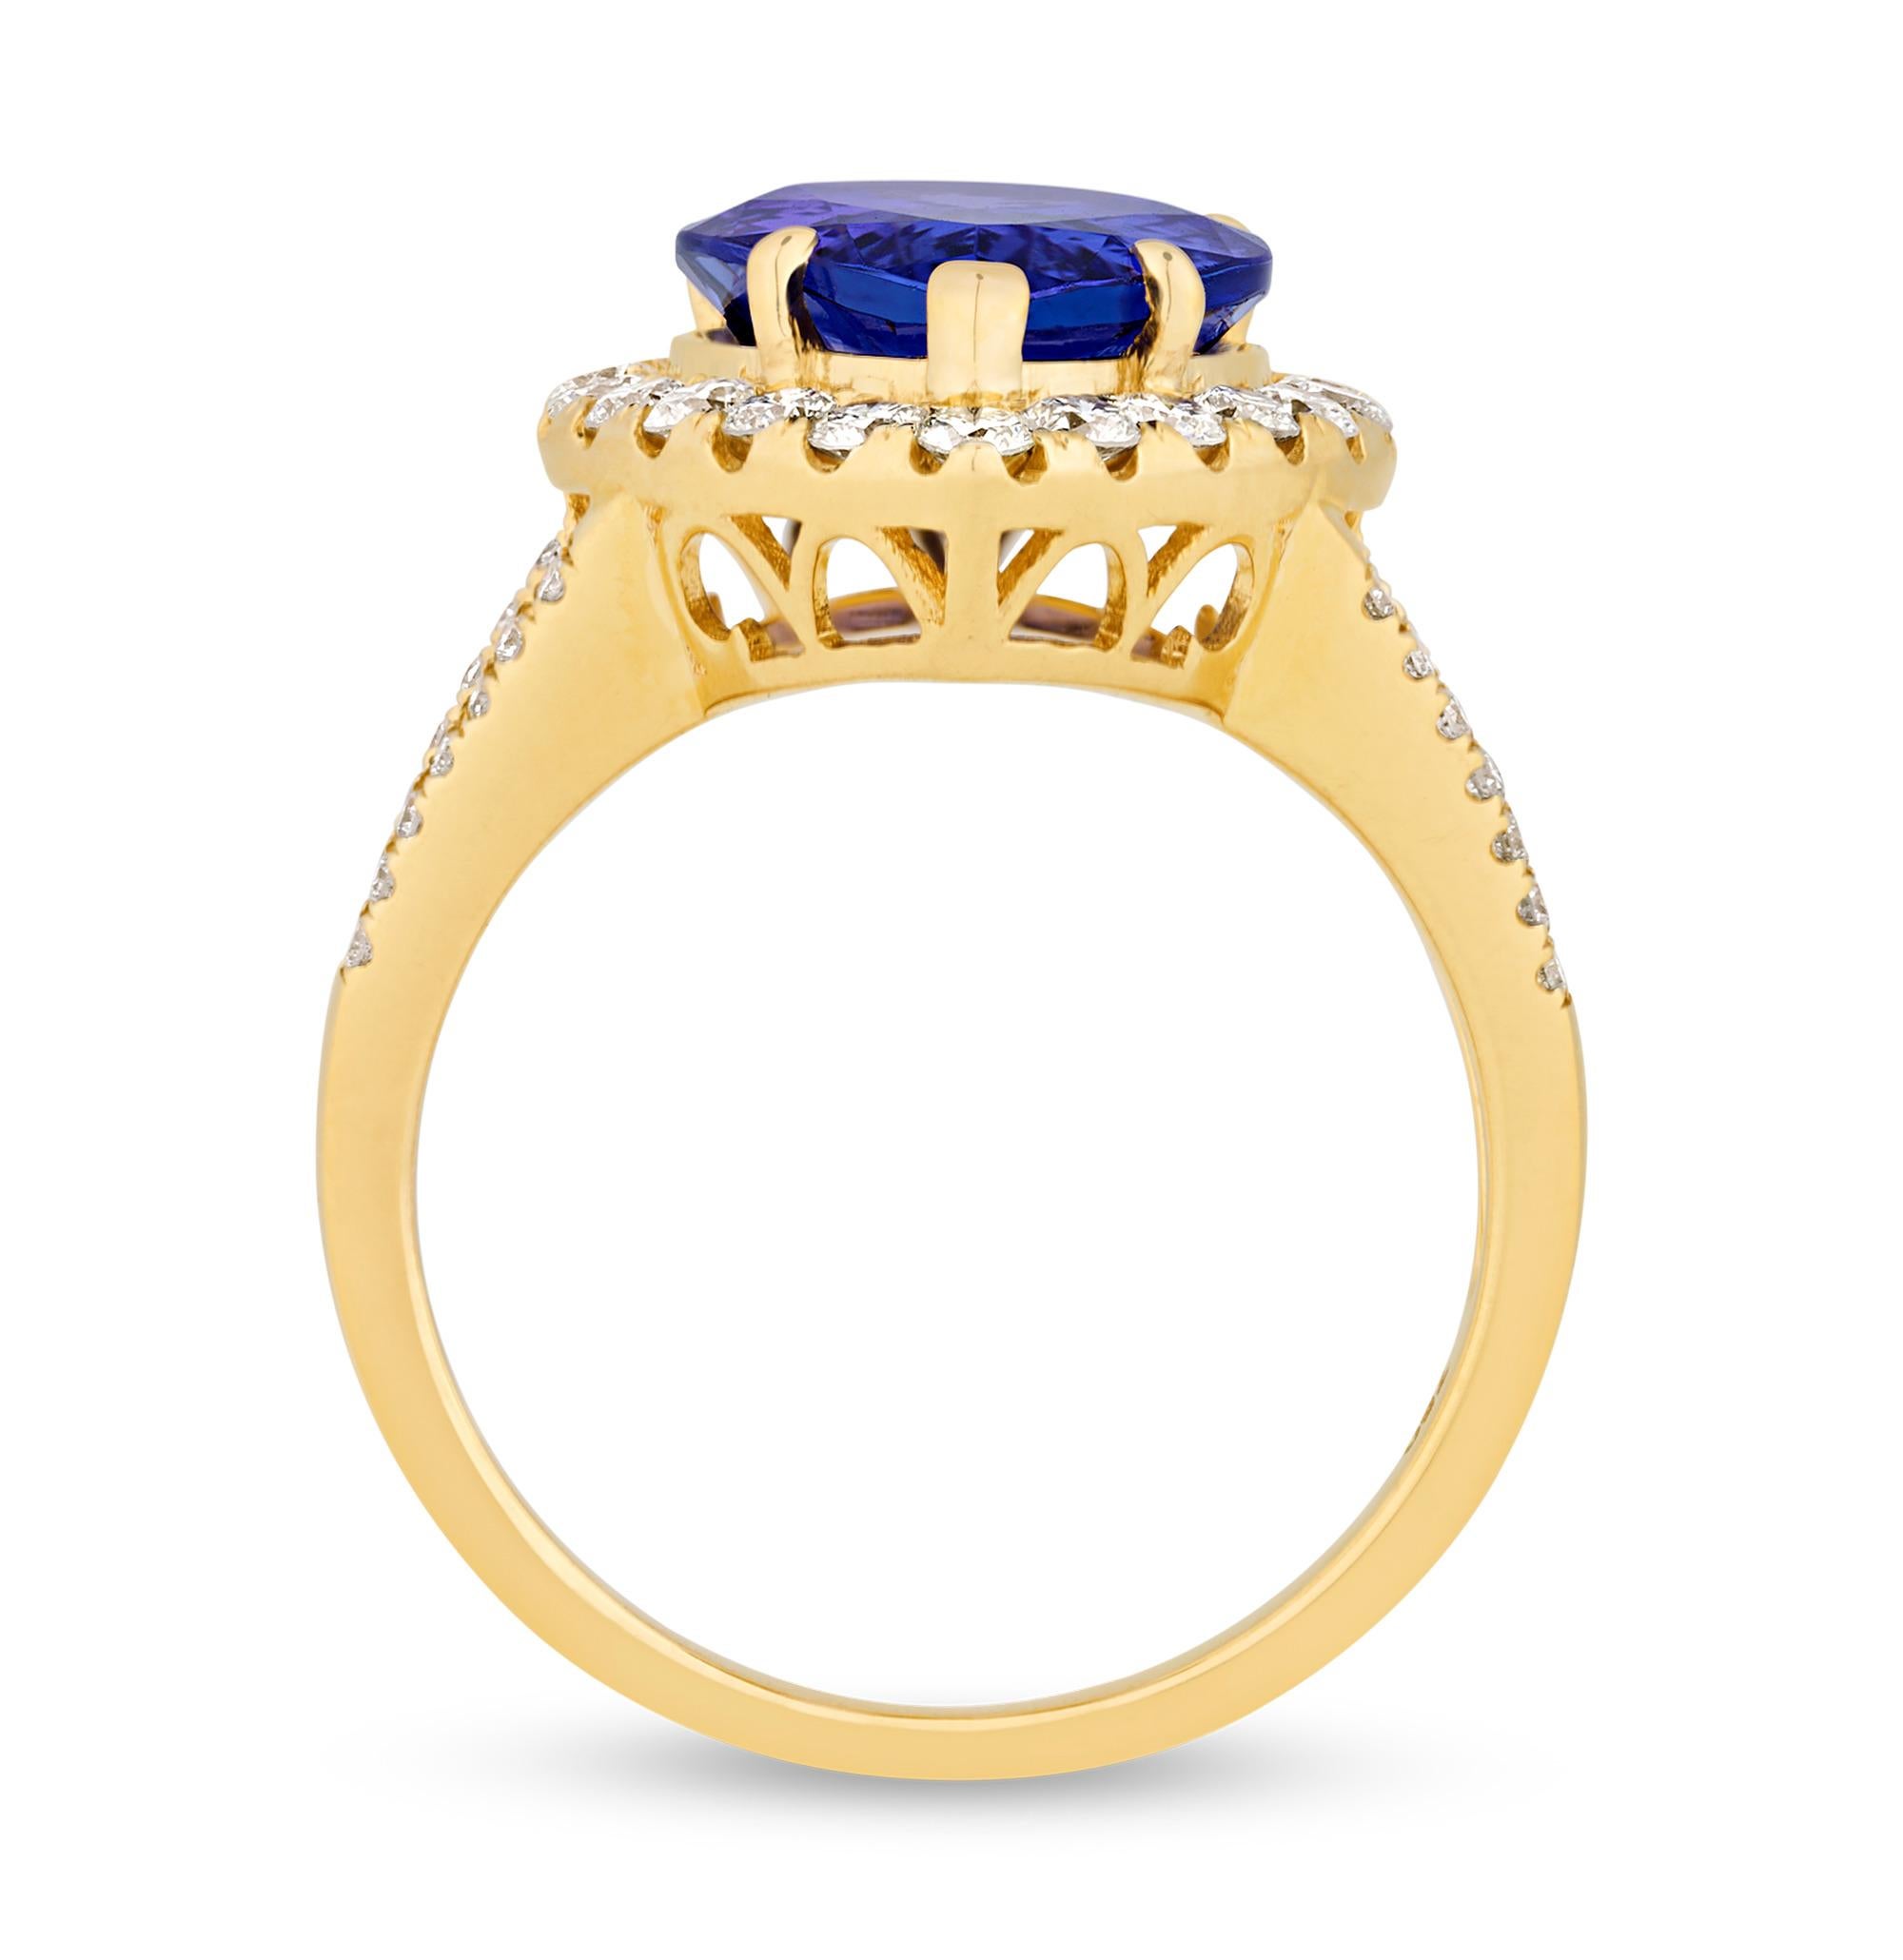 A pear-shaped tanzanite weighing 5.53 carats is set in this classic ring. The violetish-blue gem is certified by the American International GemLab, and diamond accents add further brilliance to the ring's 18K yellow gold setting.

Tanzanite is found